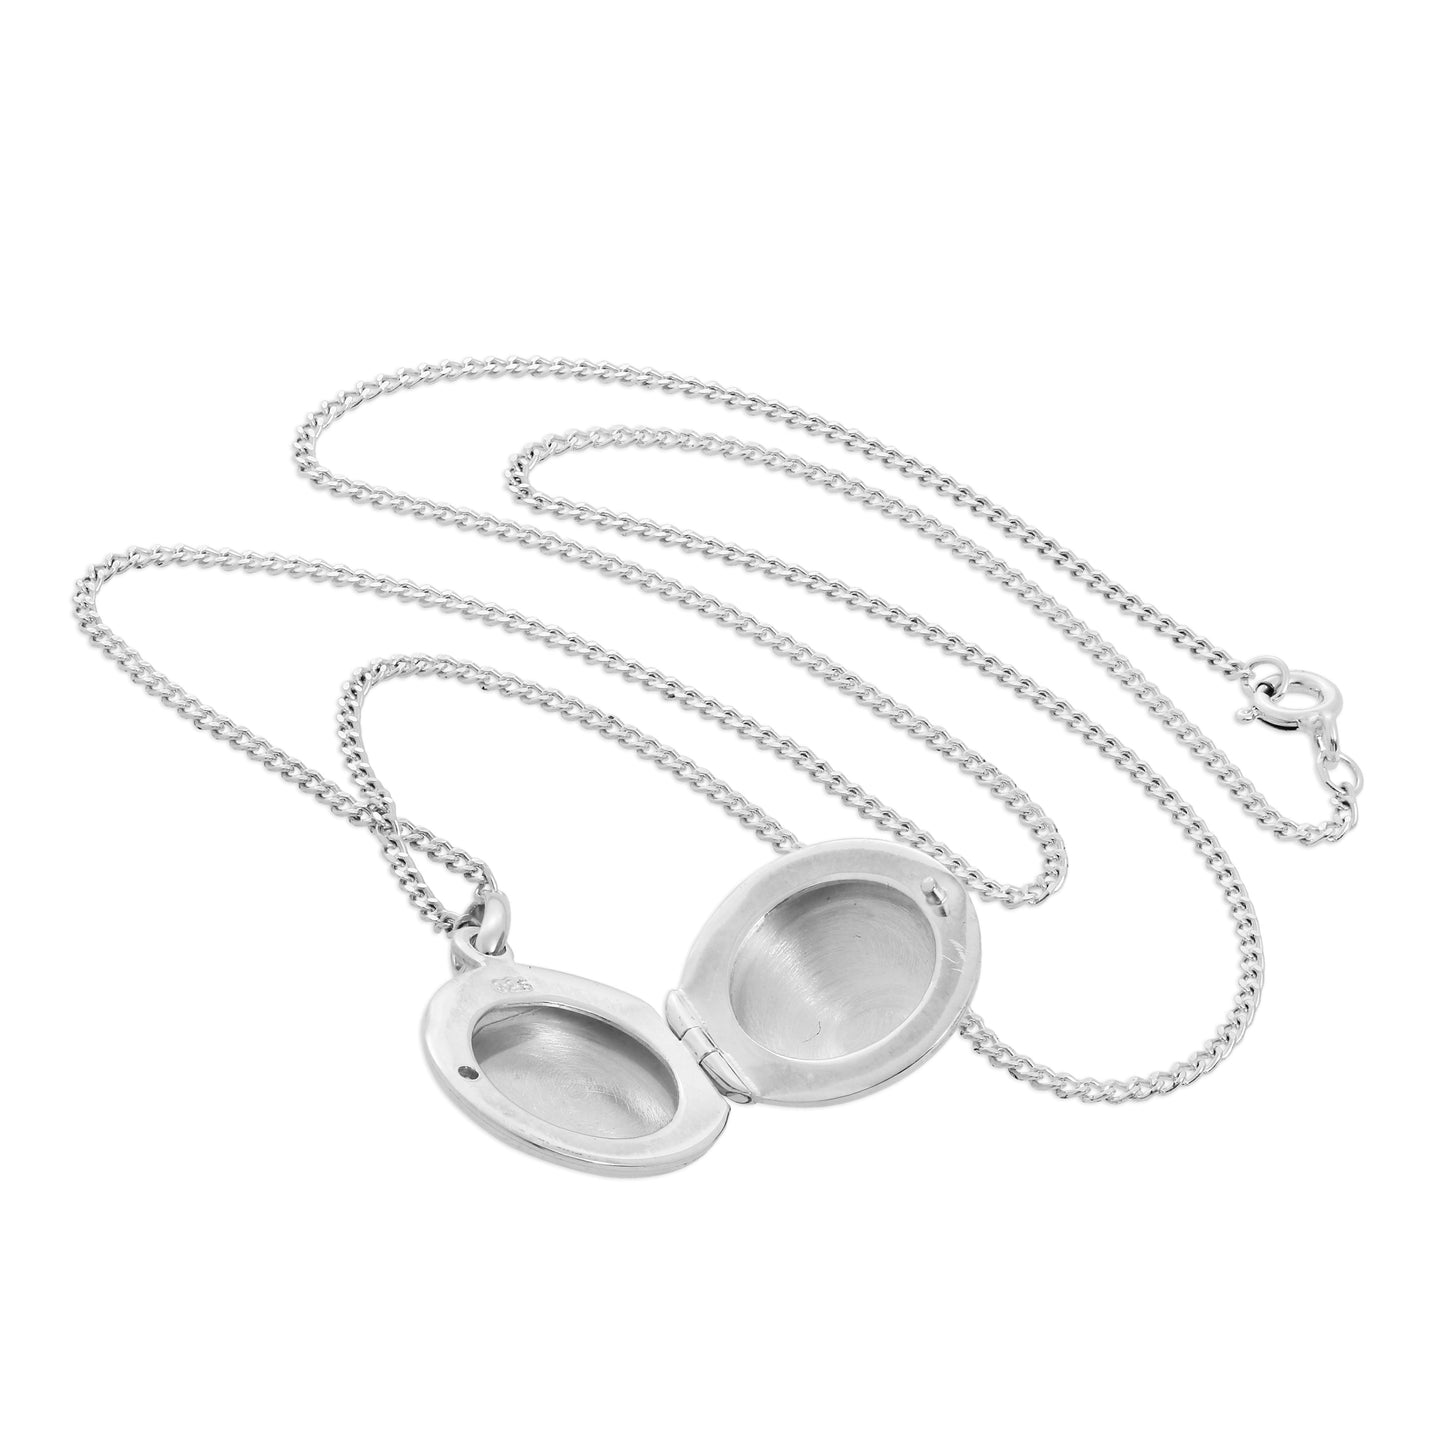 Sterling Silver Plain Round Locket on Chain 14 - 32 Inches